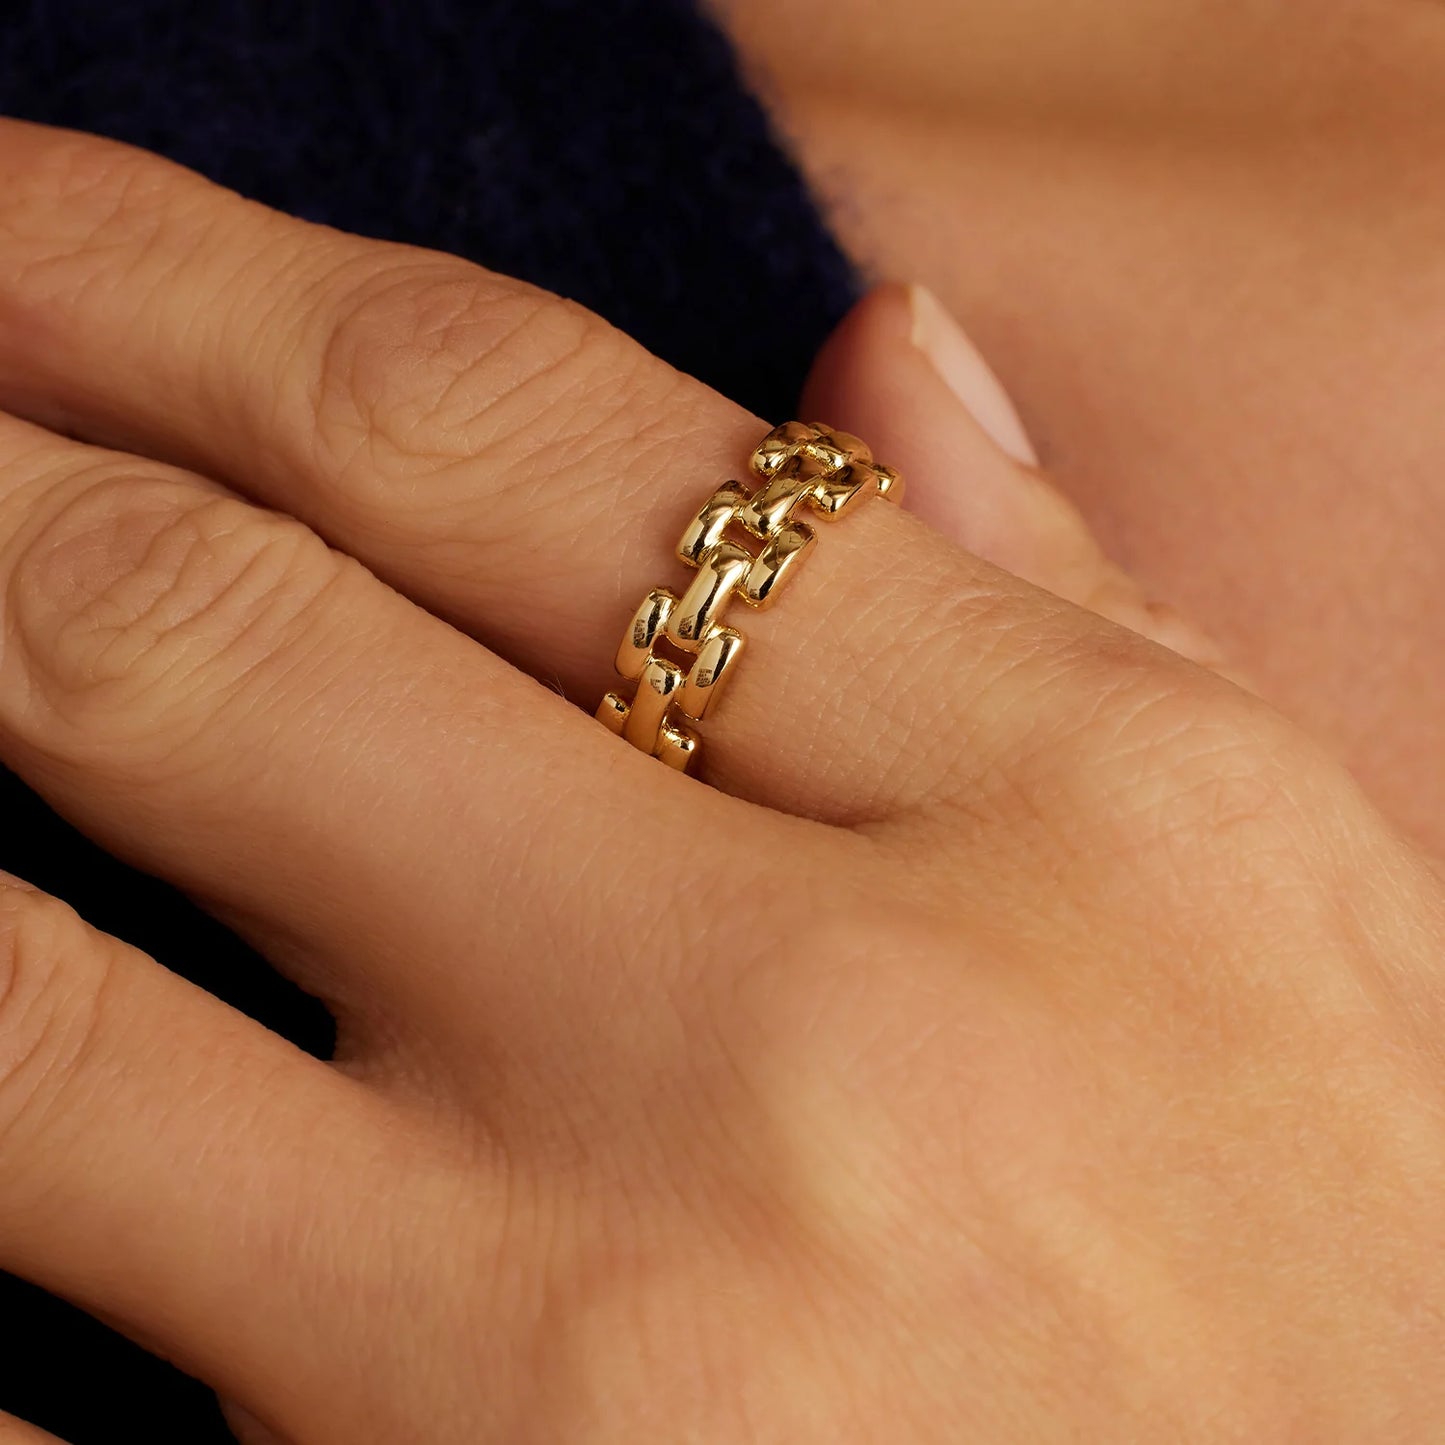 This Brooklyn Ring is crafted with 18 k gold plated brass for a beautiful, long-lasting shine. Its stand-alone bold chain link design is from acclaimed California designer Gorjana, ensuring high-end style.